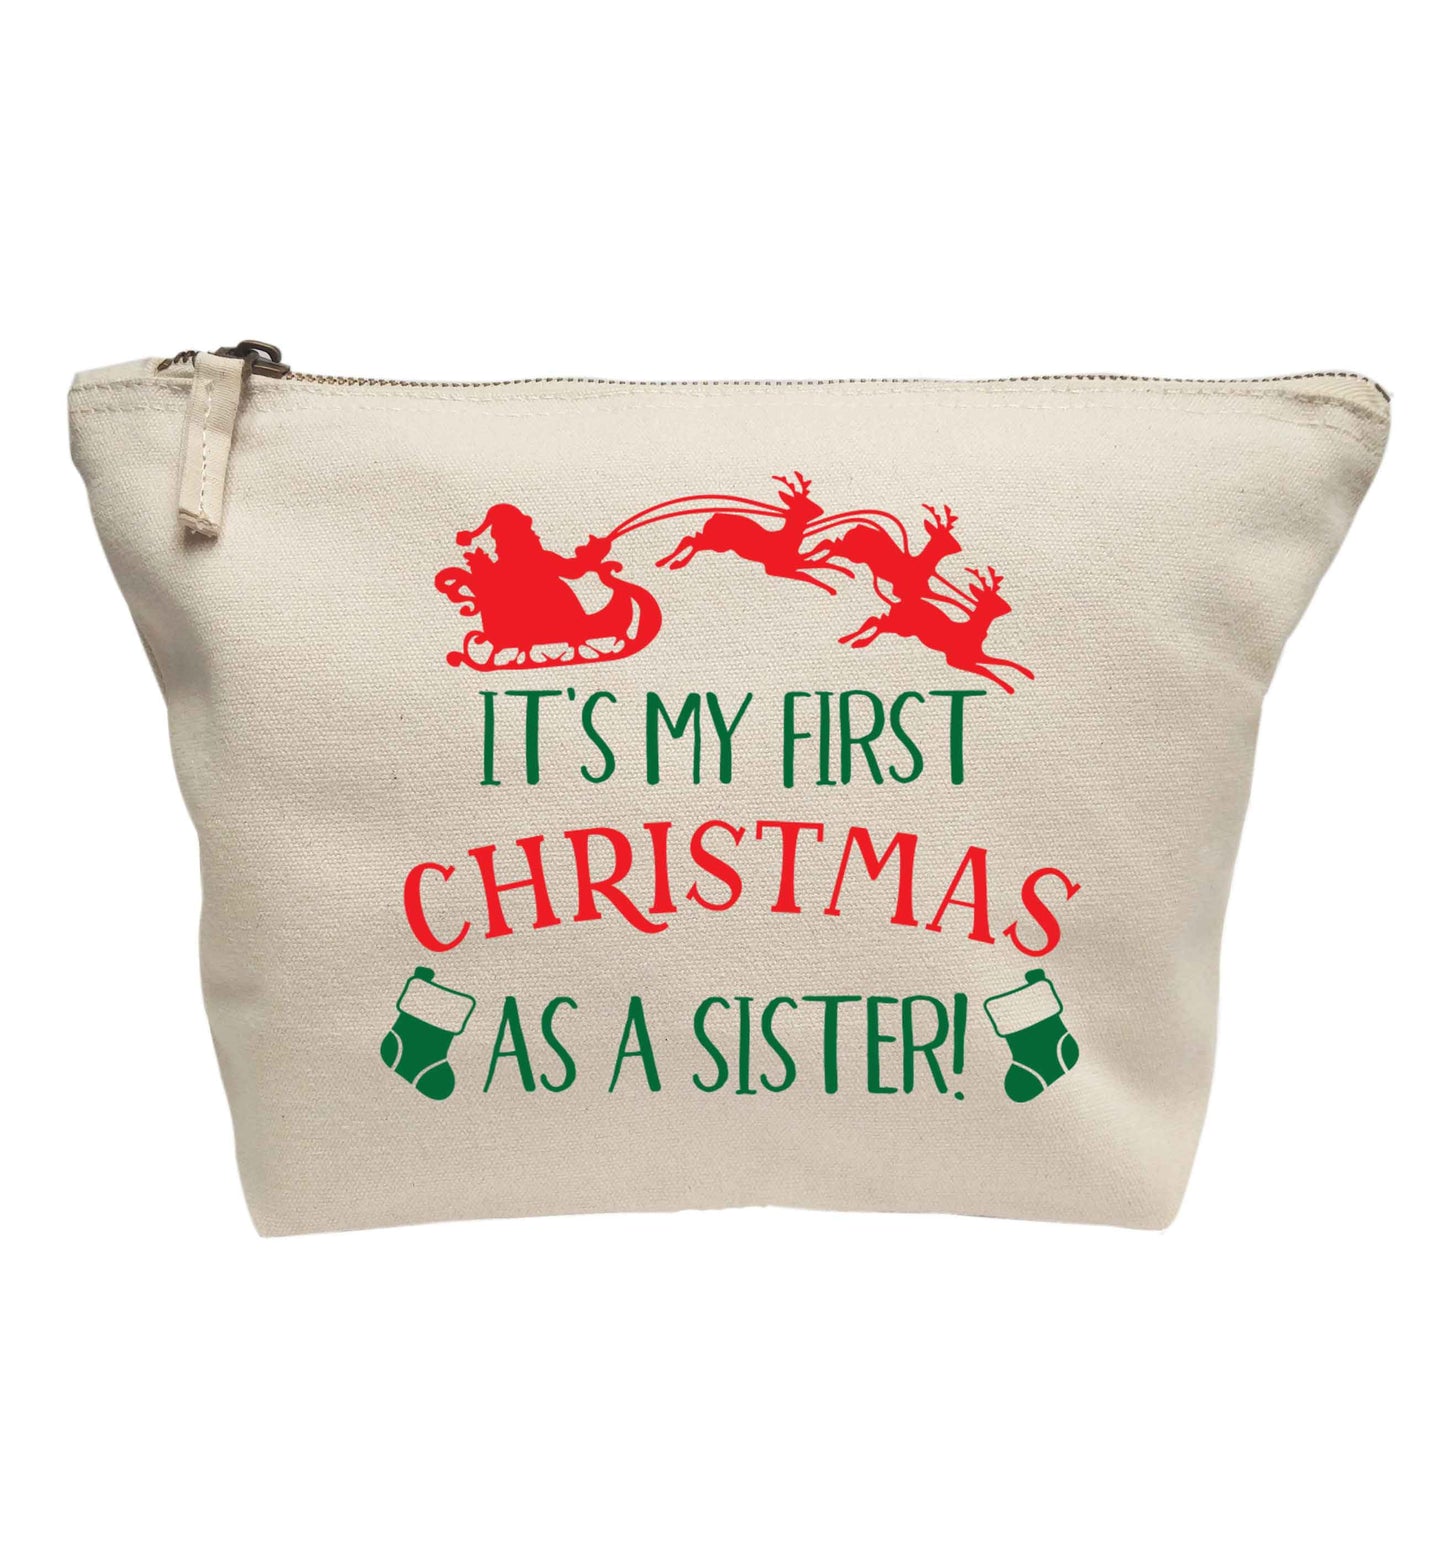 It's my first Christmas as a sister! | makeup / wash bag